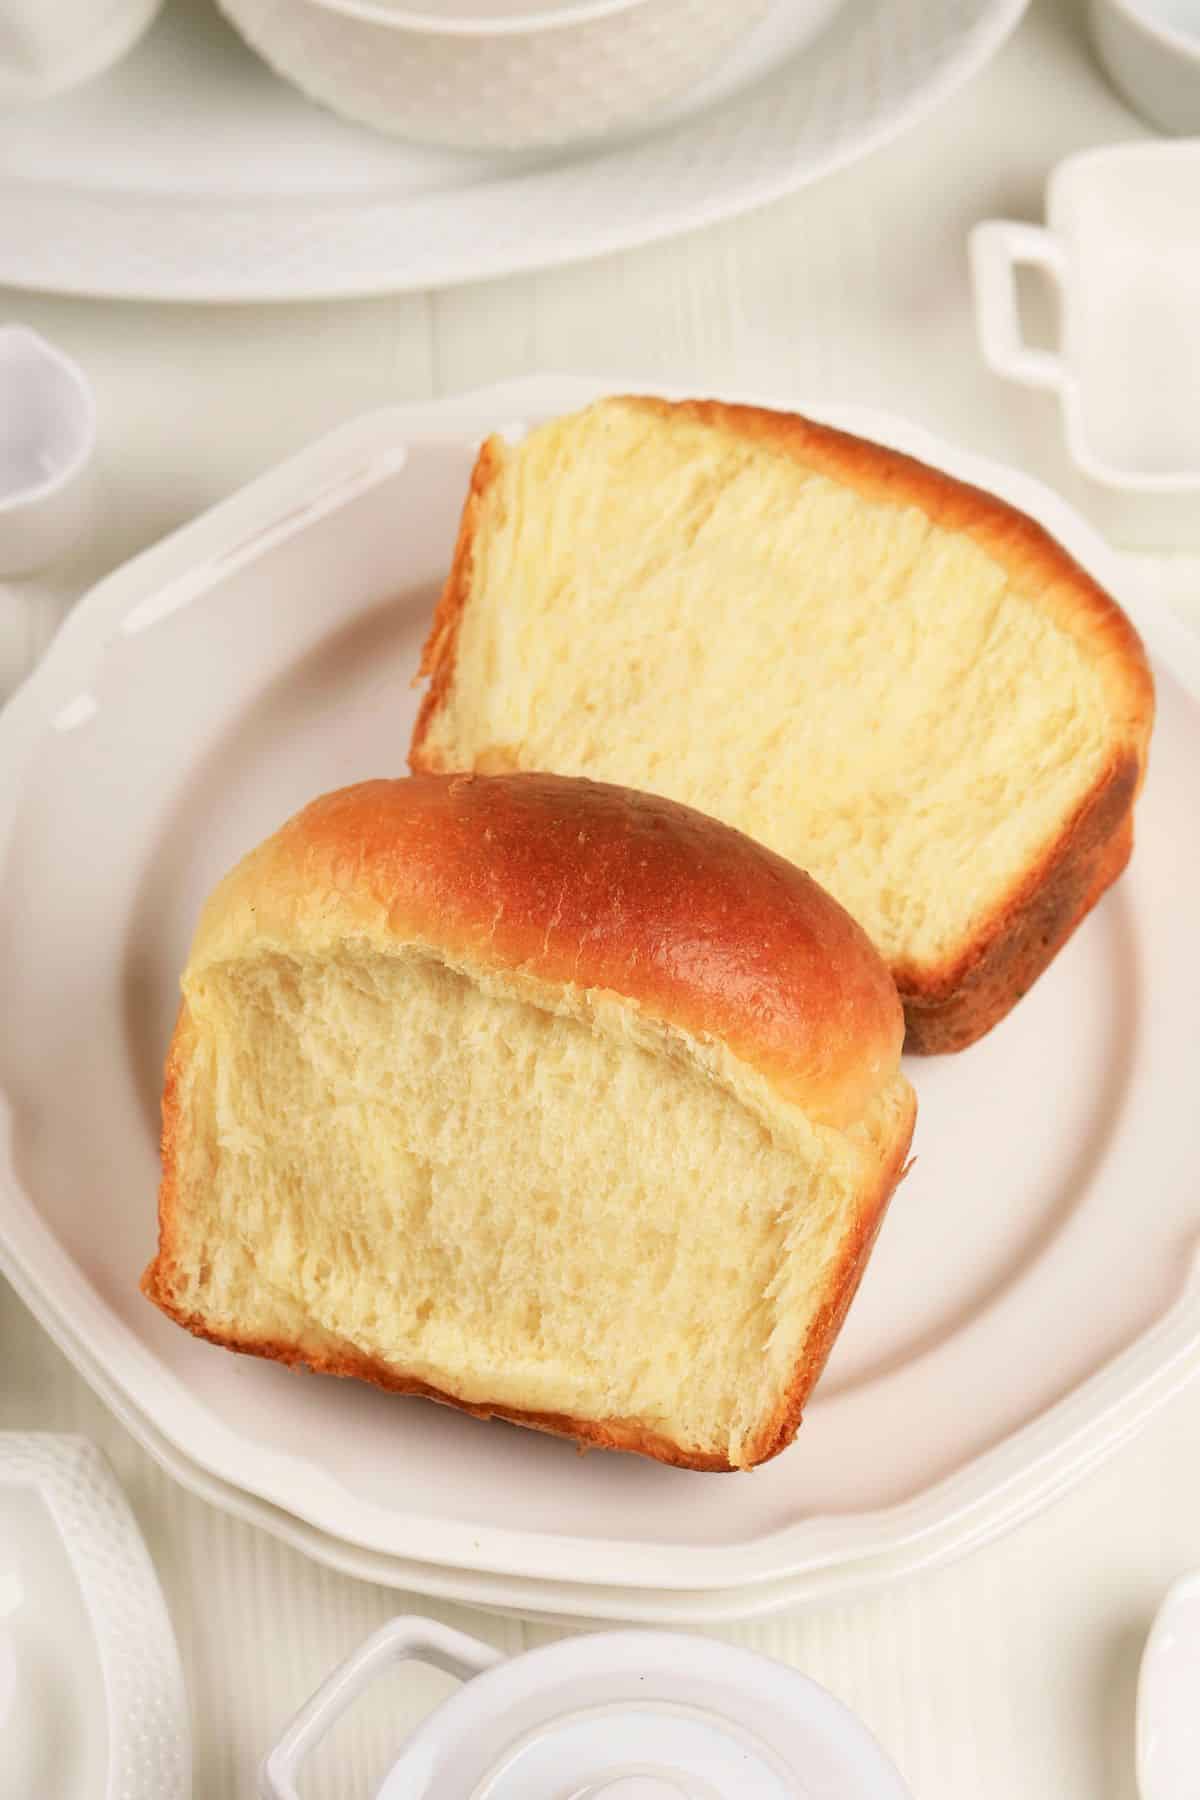 soft bread on plate.